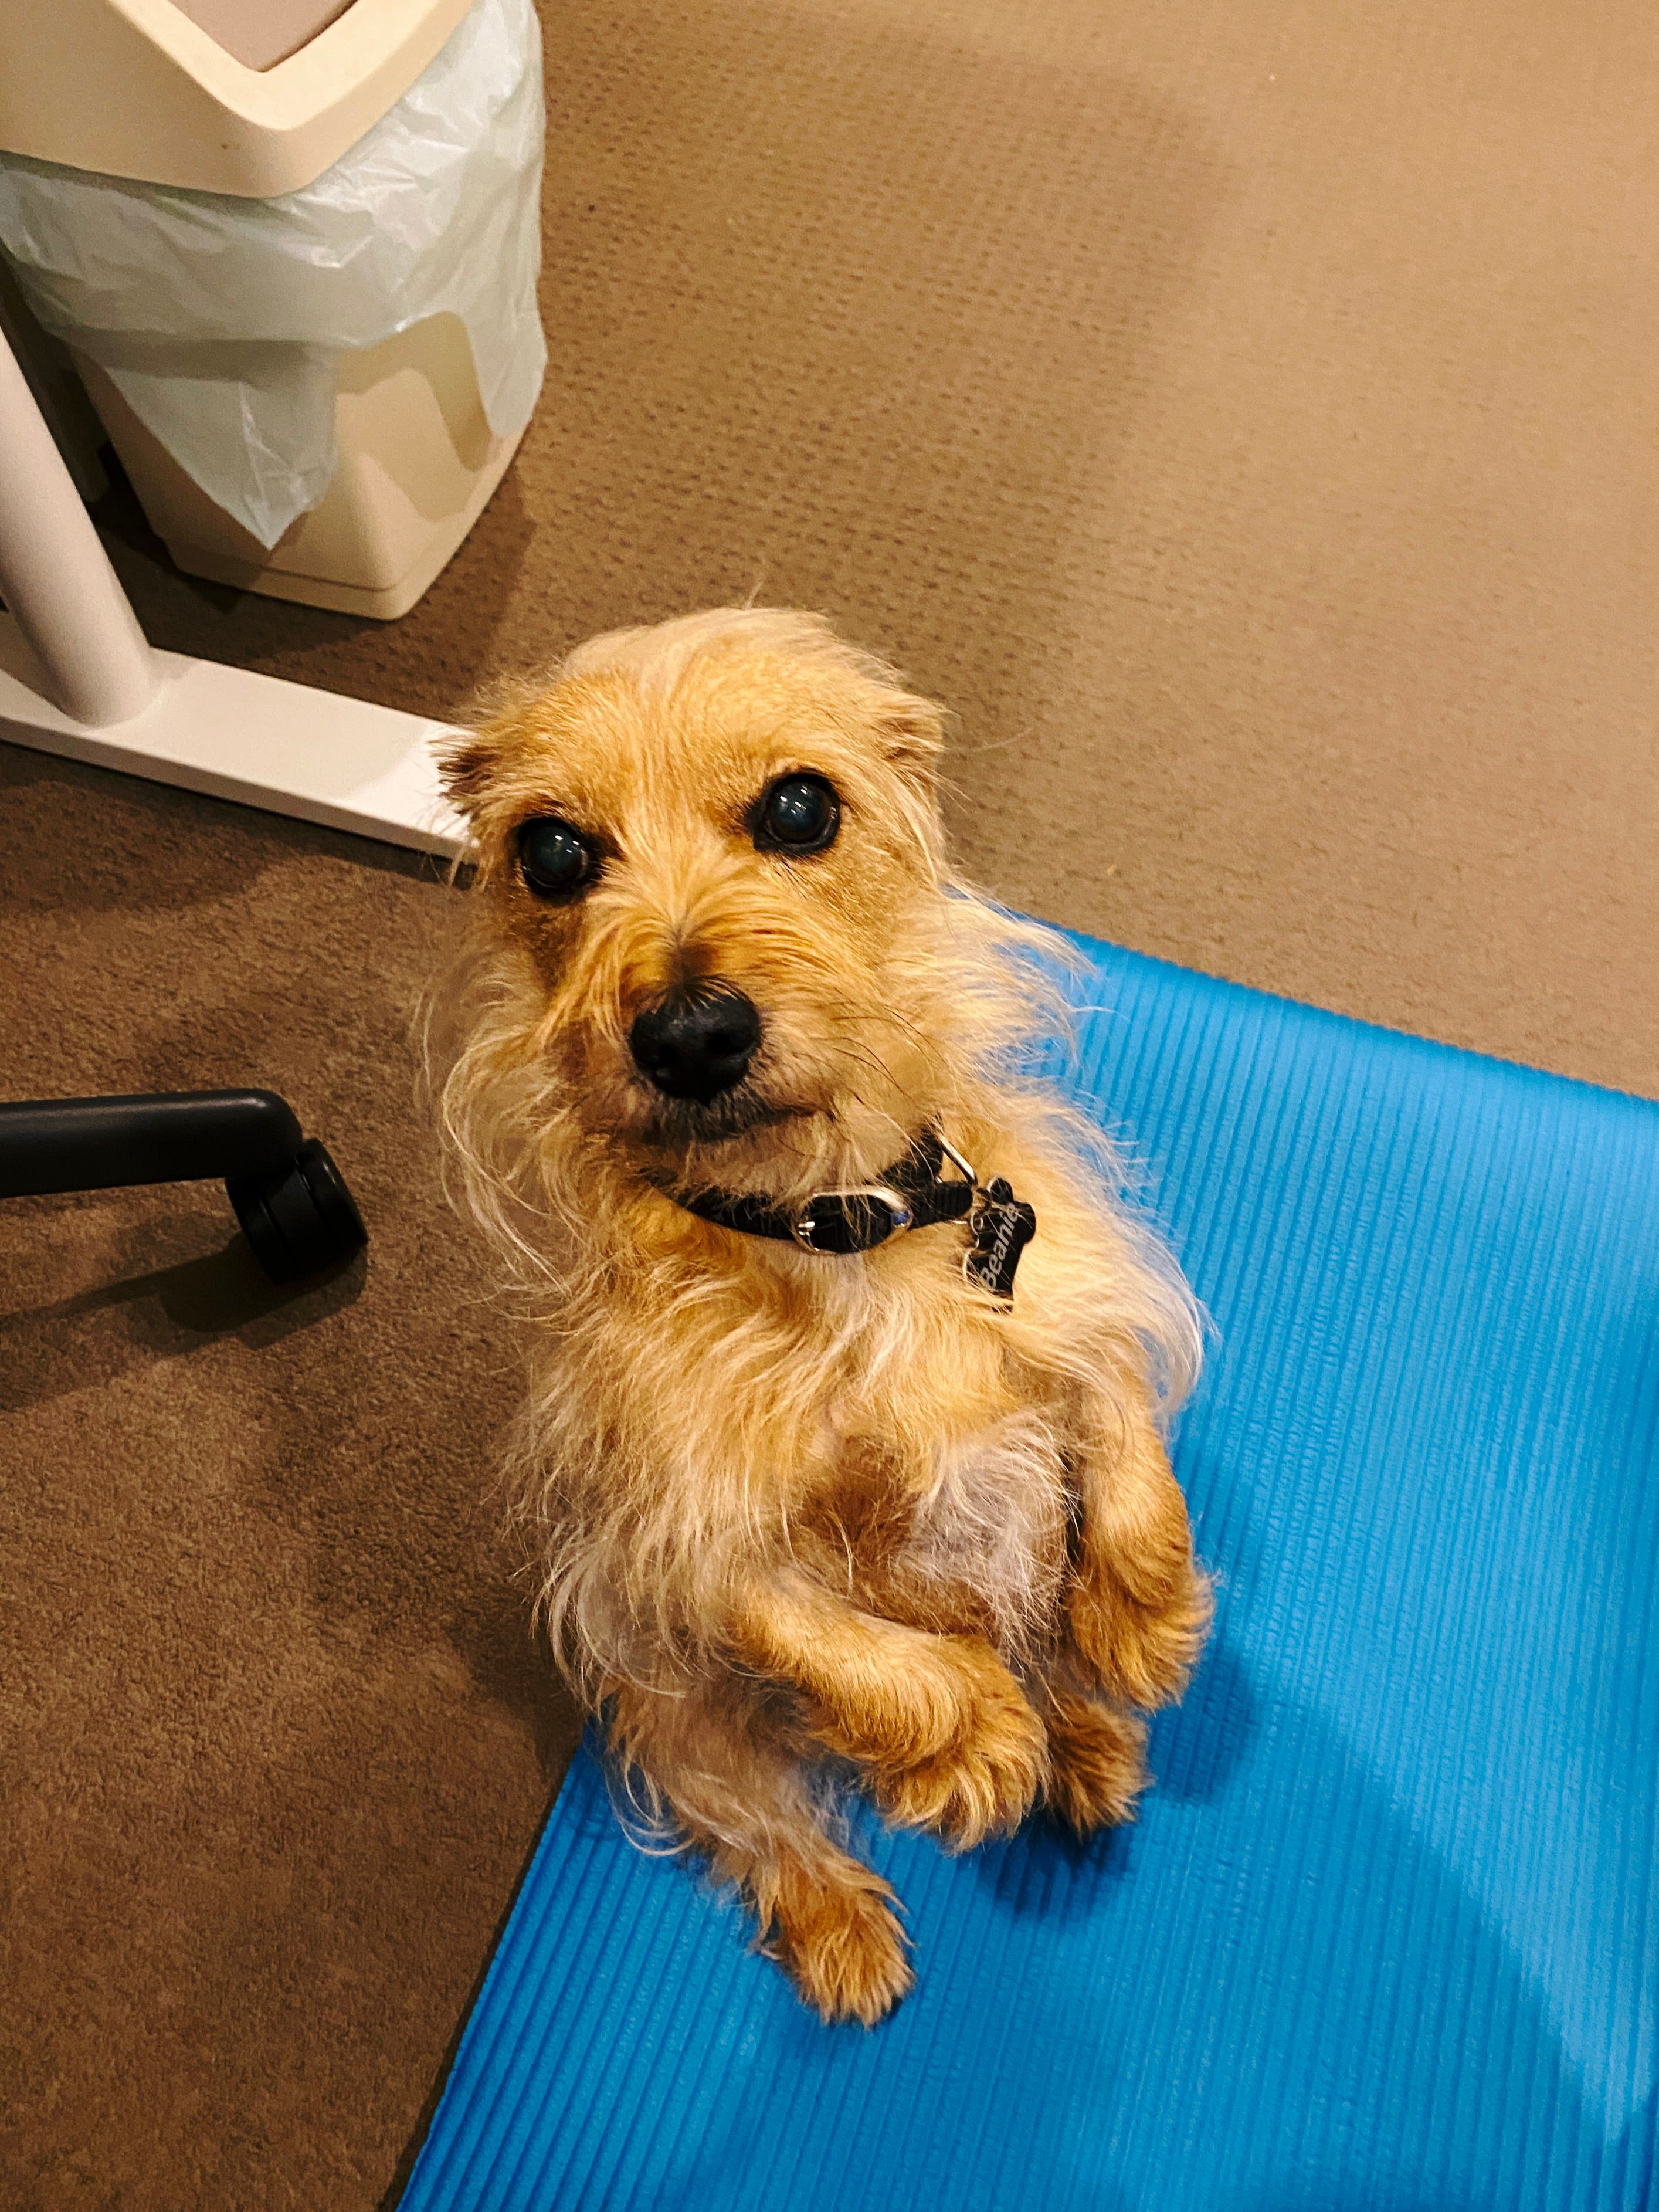 A photo of a small scruffy blonde dog sitting up on his back haunches with his ears EXTREMELY back, looking imploringly at the camera.